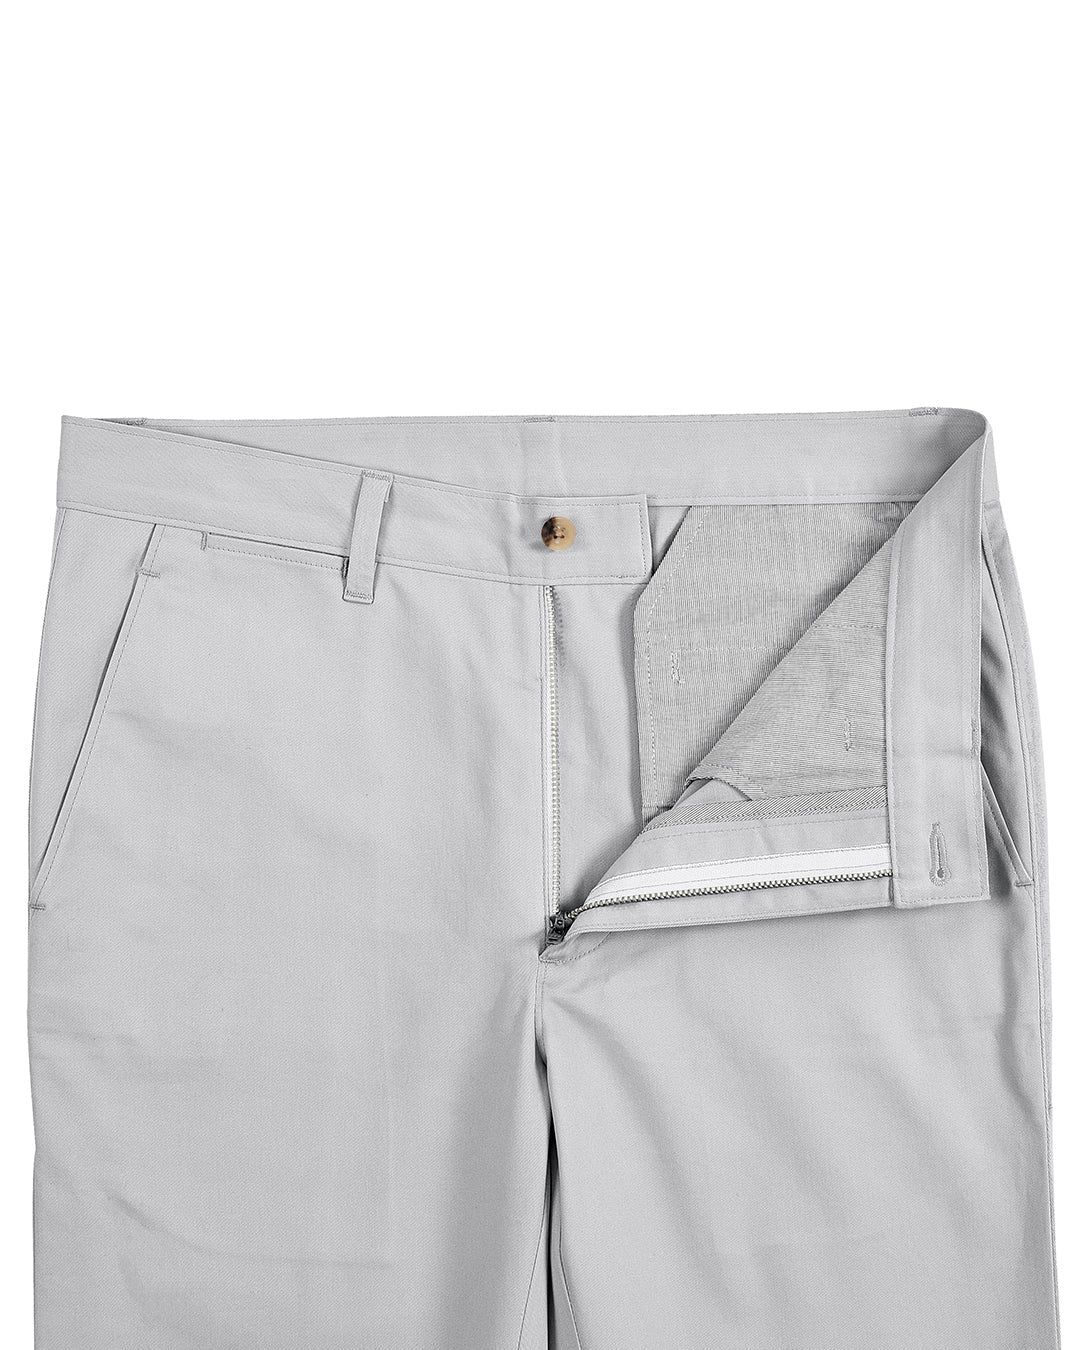 Front open view of custom Genoa Chino pants for men by Luxire in light grey